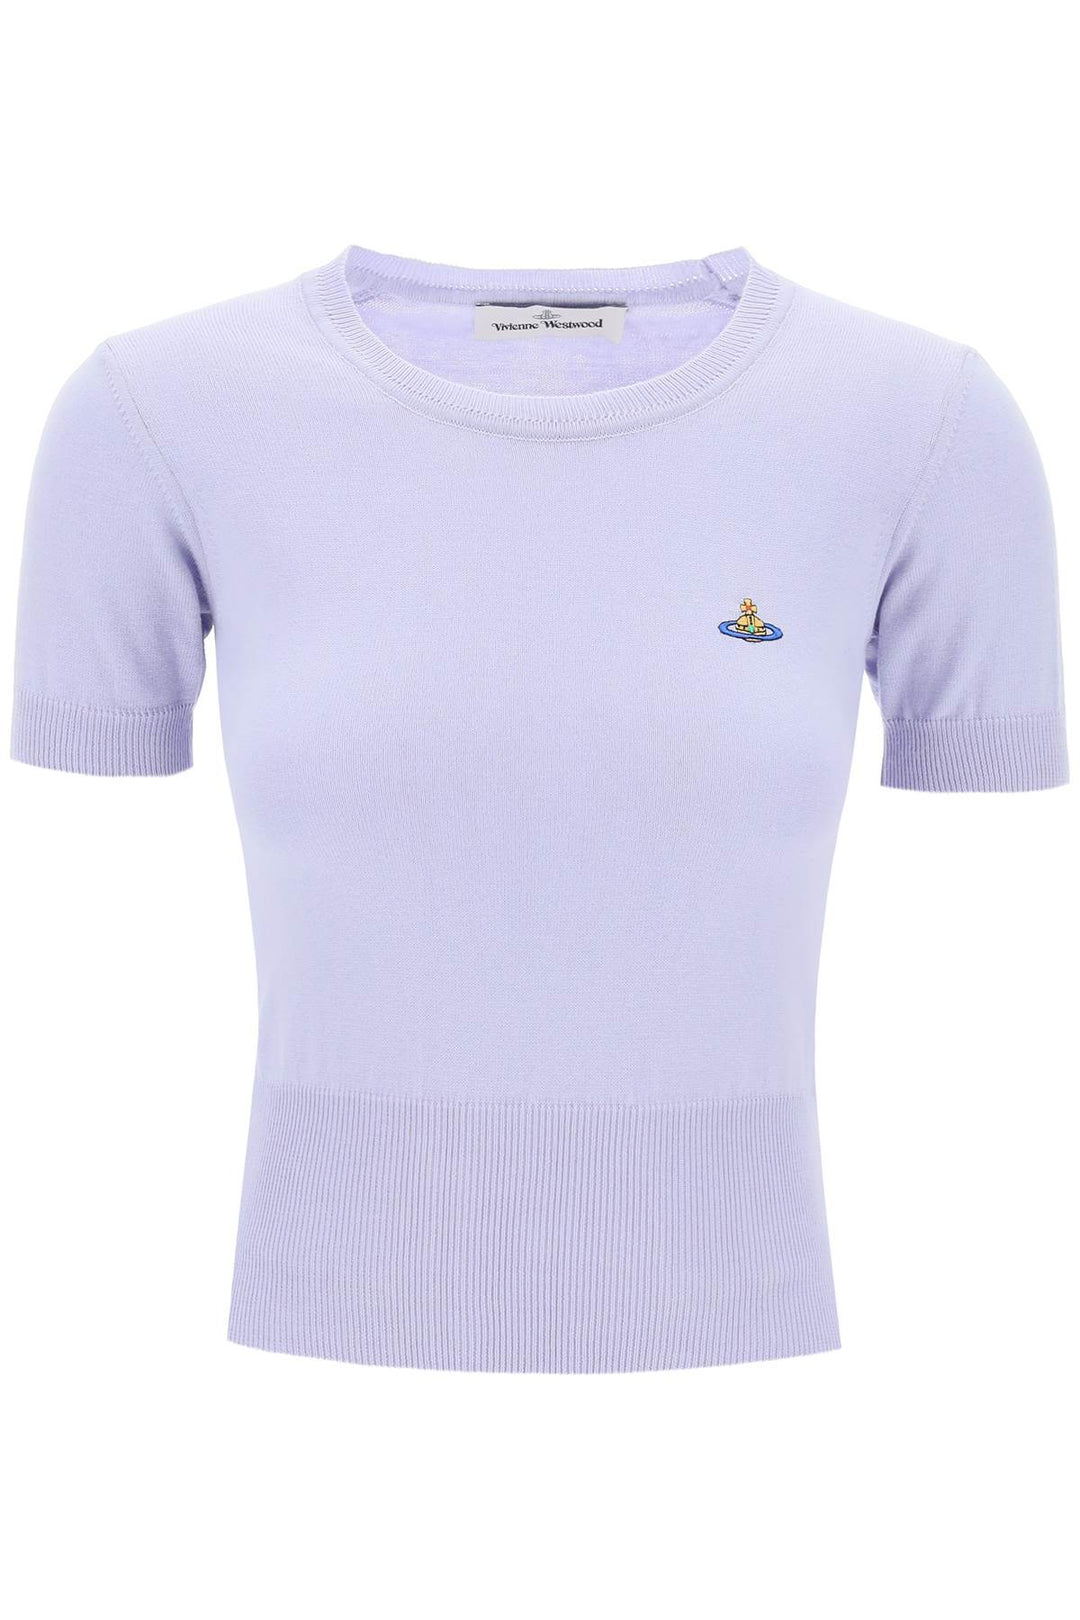 Vivienne Westwood Bea Short Sleeve Sweater With Orb Embroidery   Viola